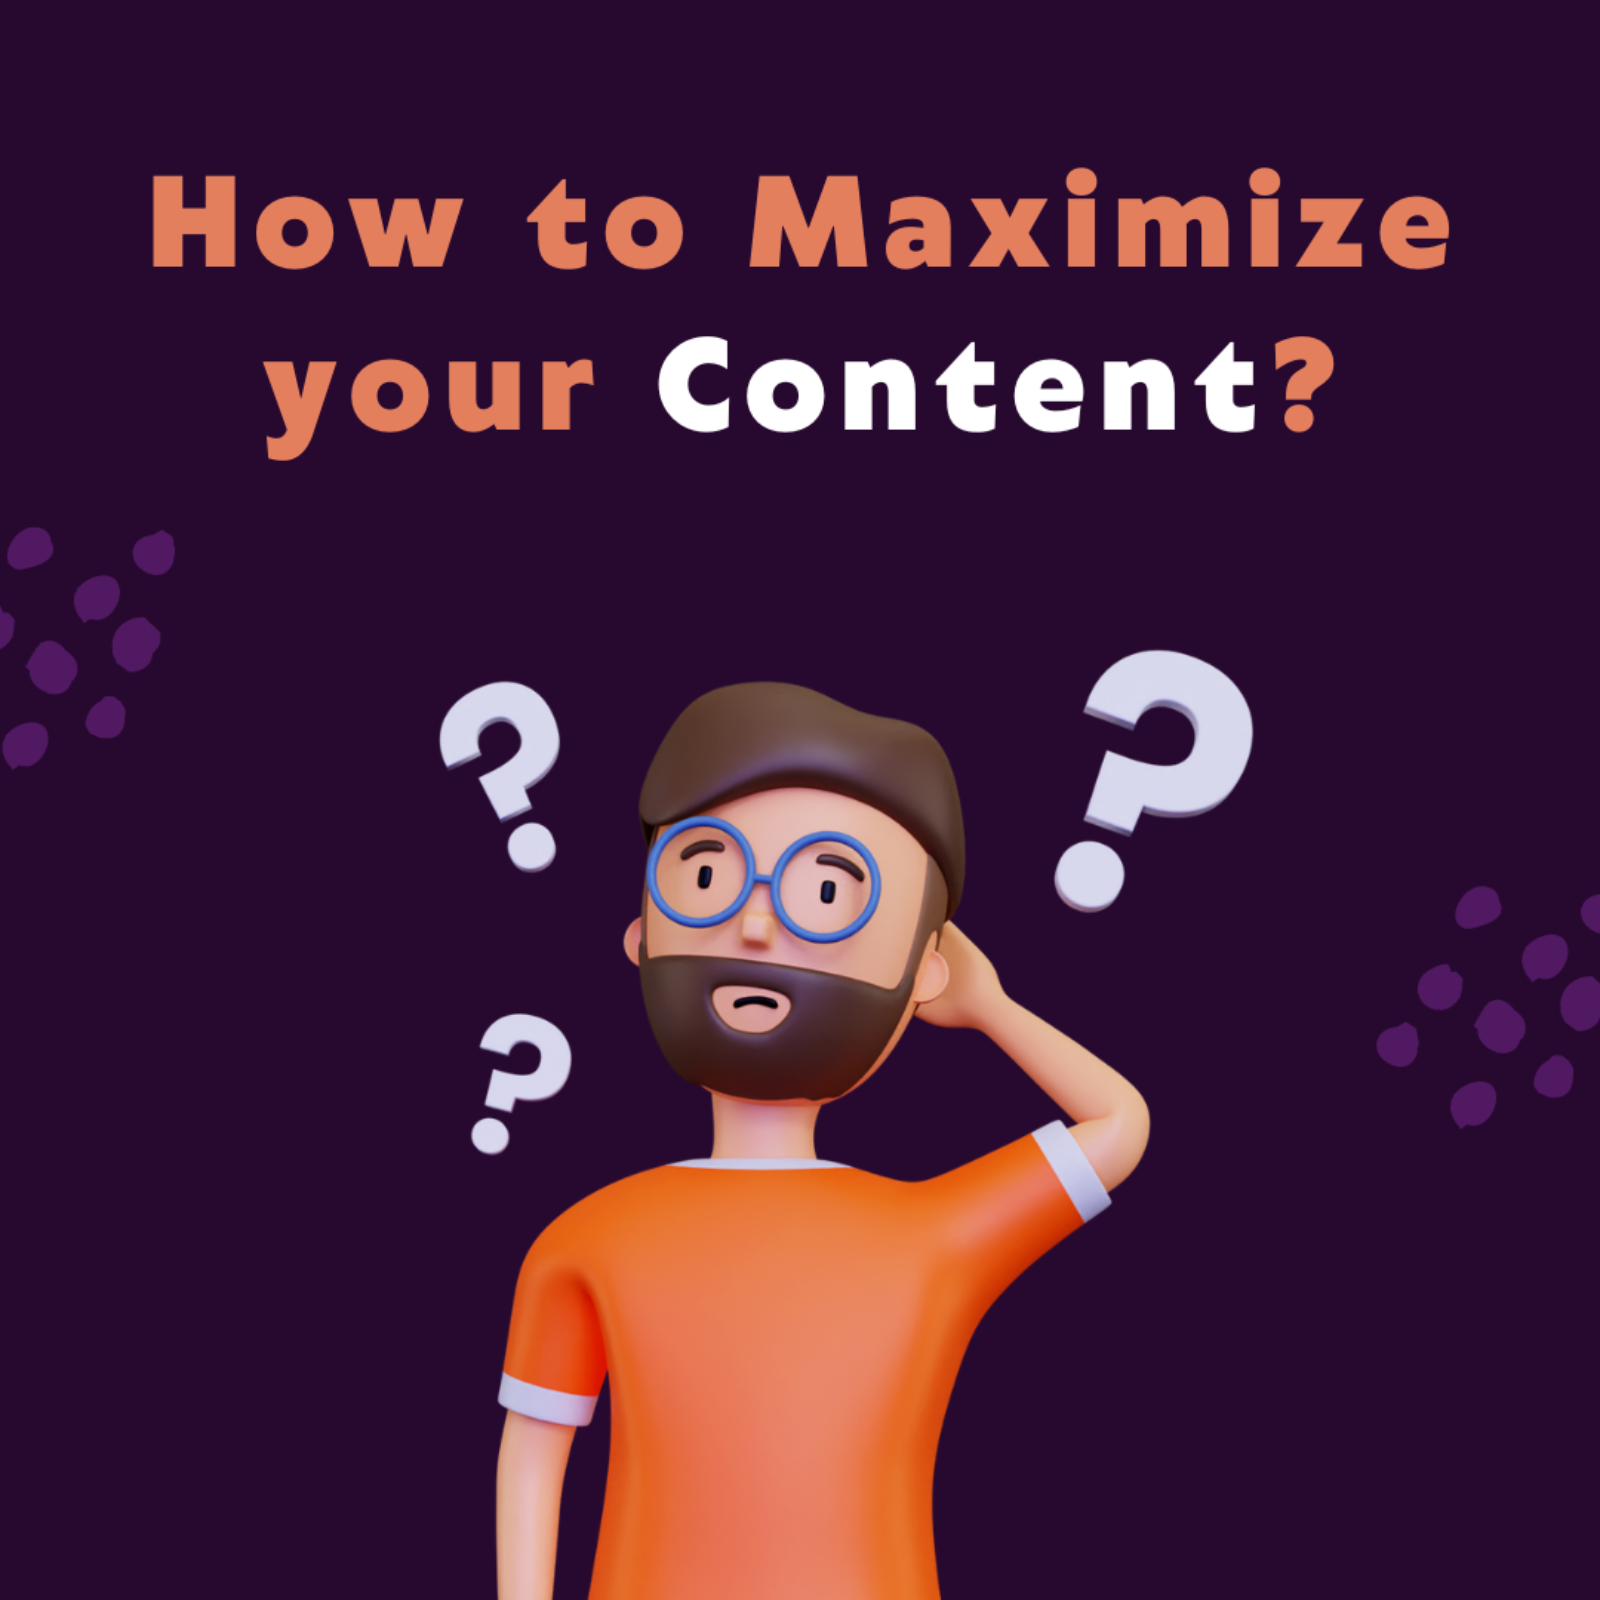 How to Maximize your Content?